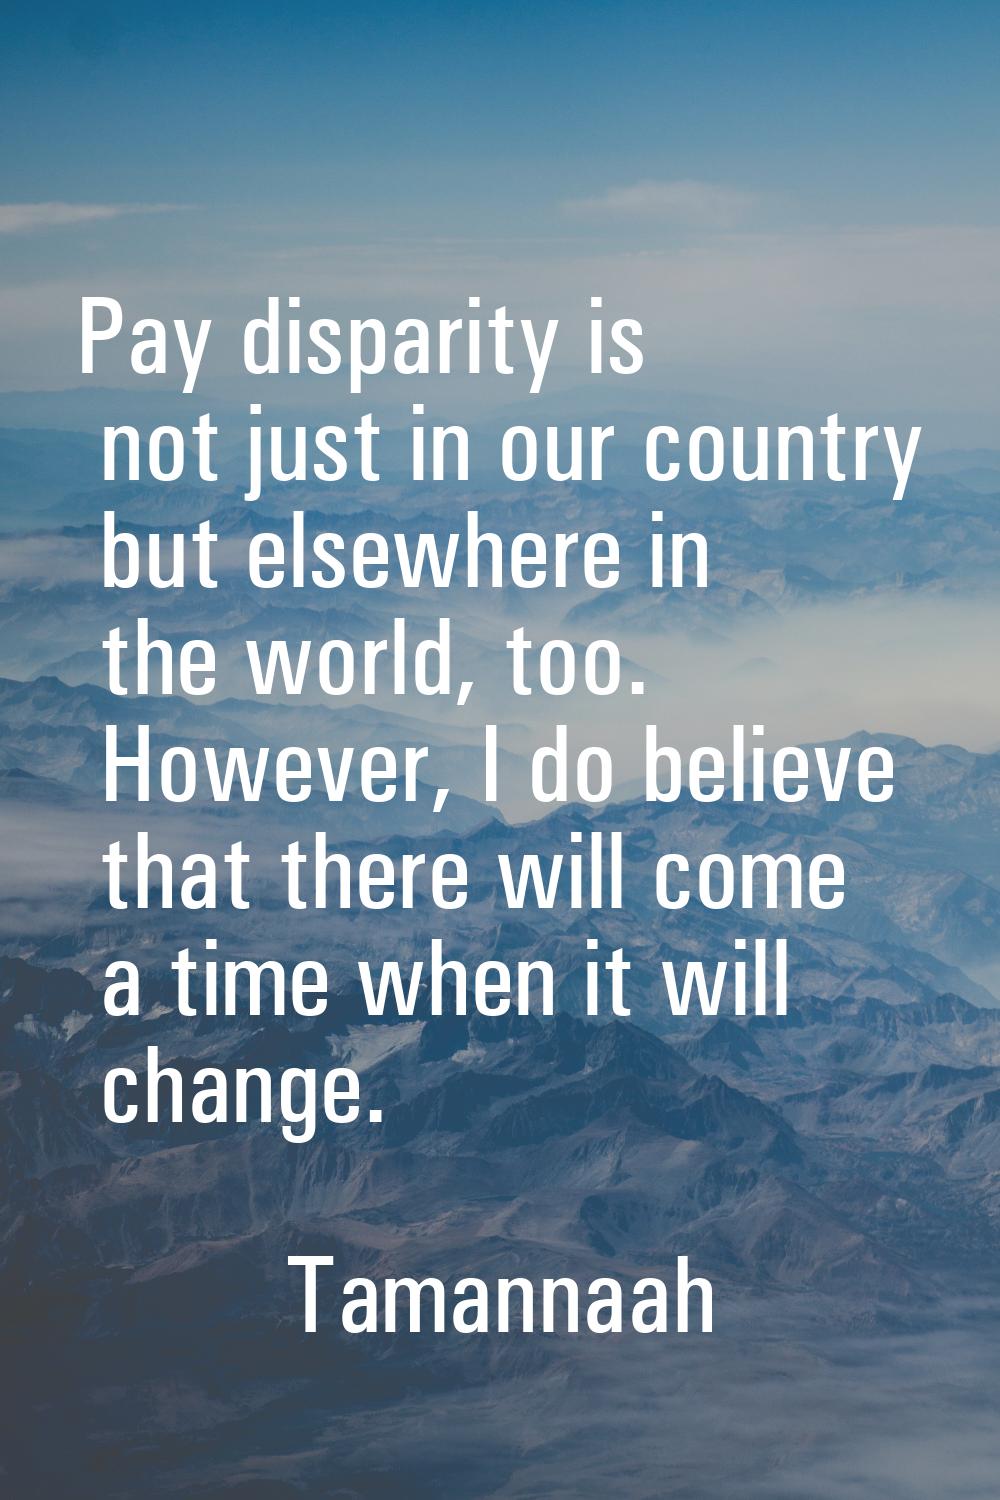 Pay disparity is not just in our country but elsewhere in the world, too. However, I do believe tha